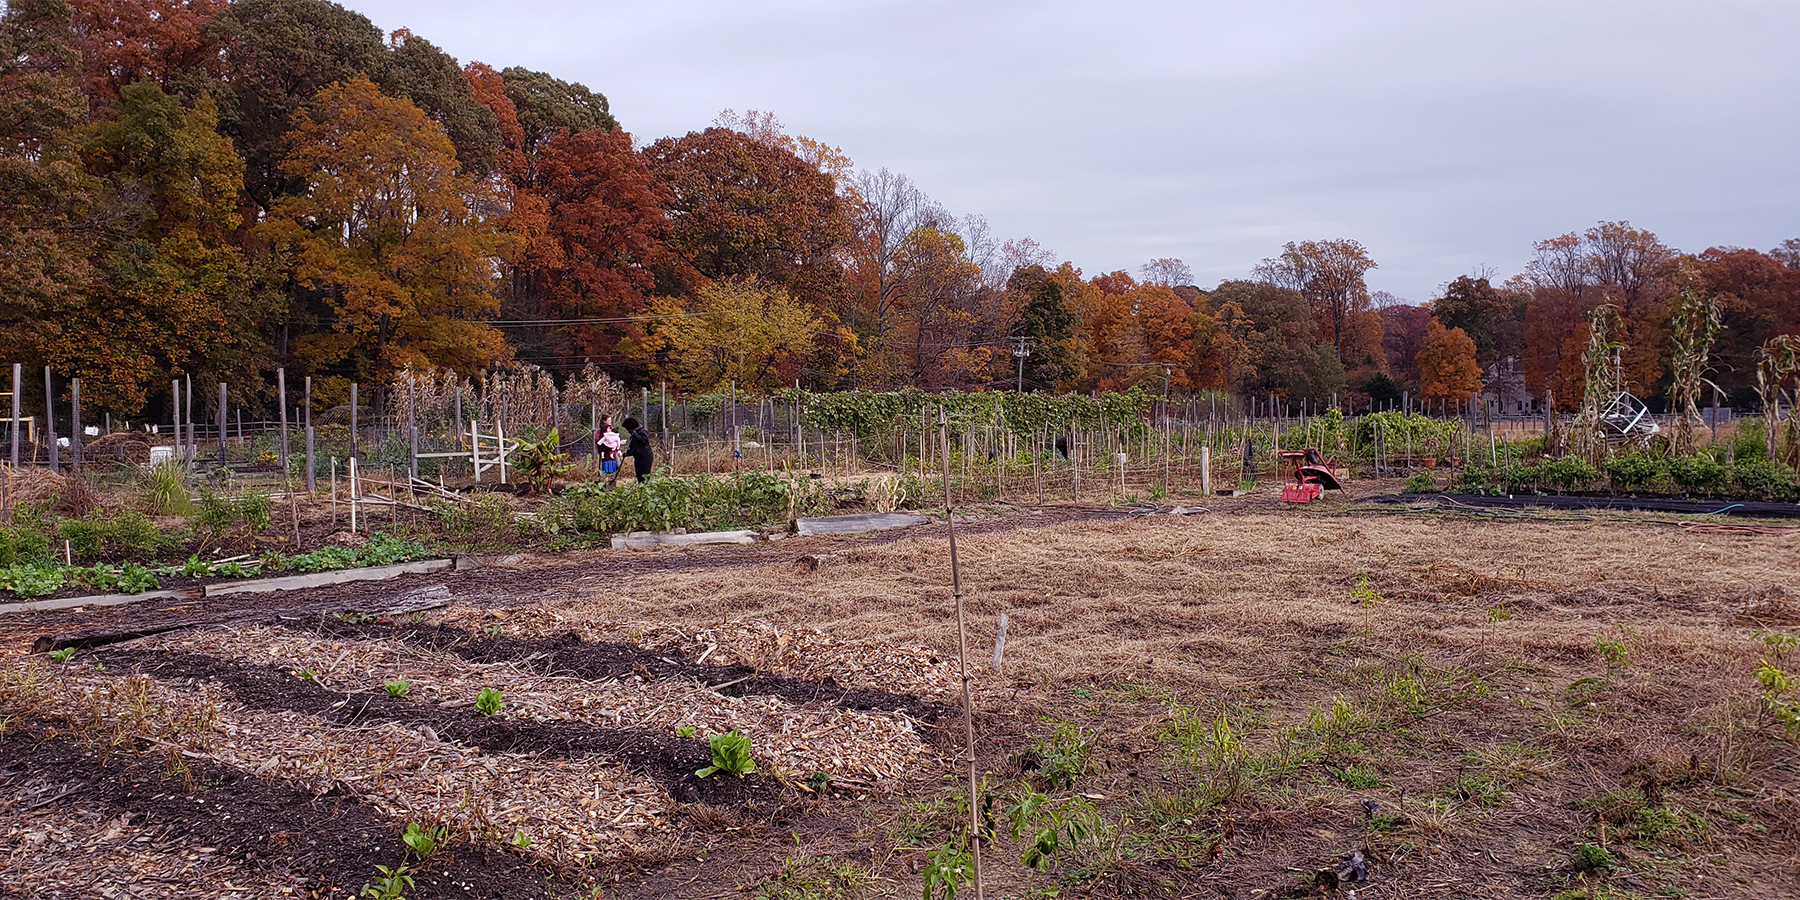 A garden near Annapolis, where migrants grow food to support their families. Photo provided by Selwyn Avenue Presbyterian Church.